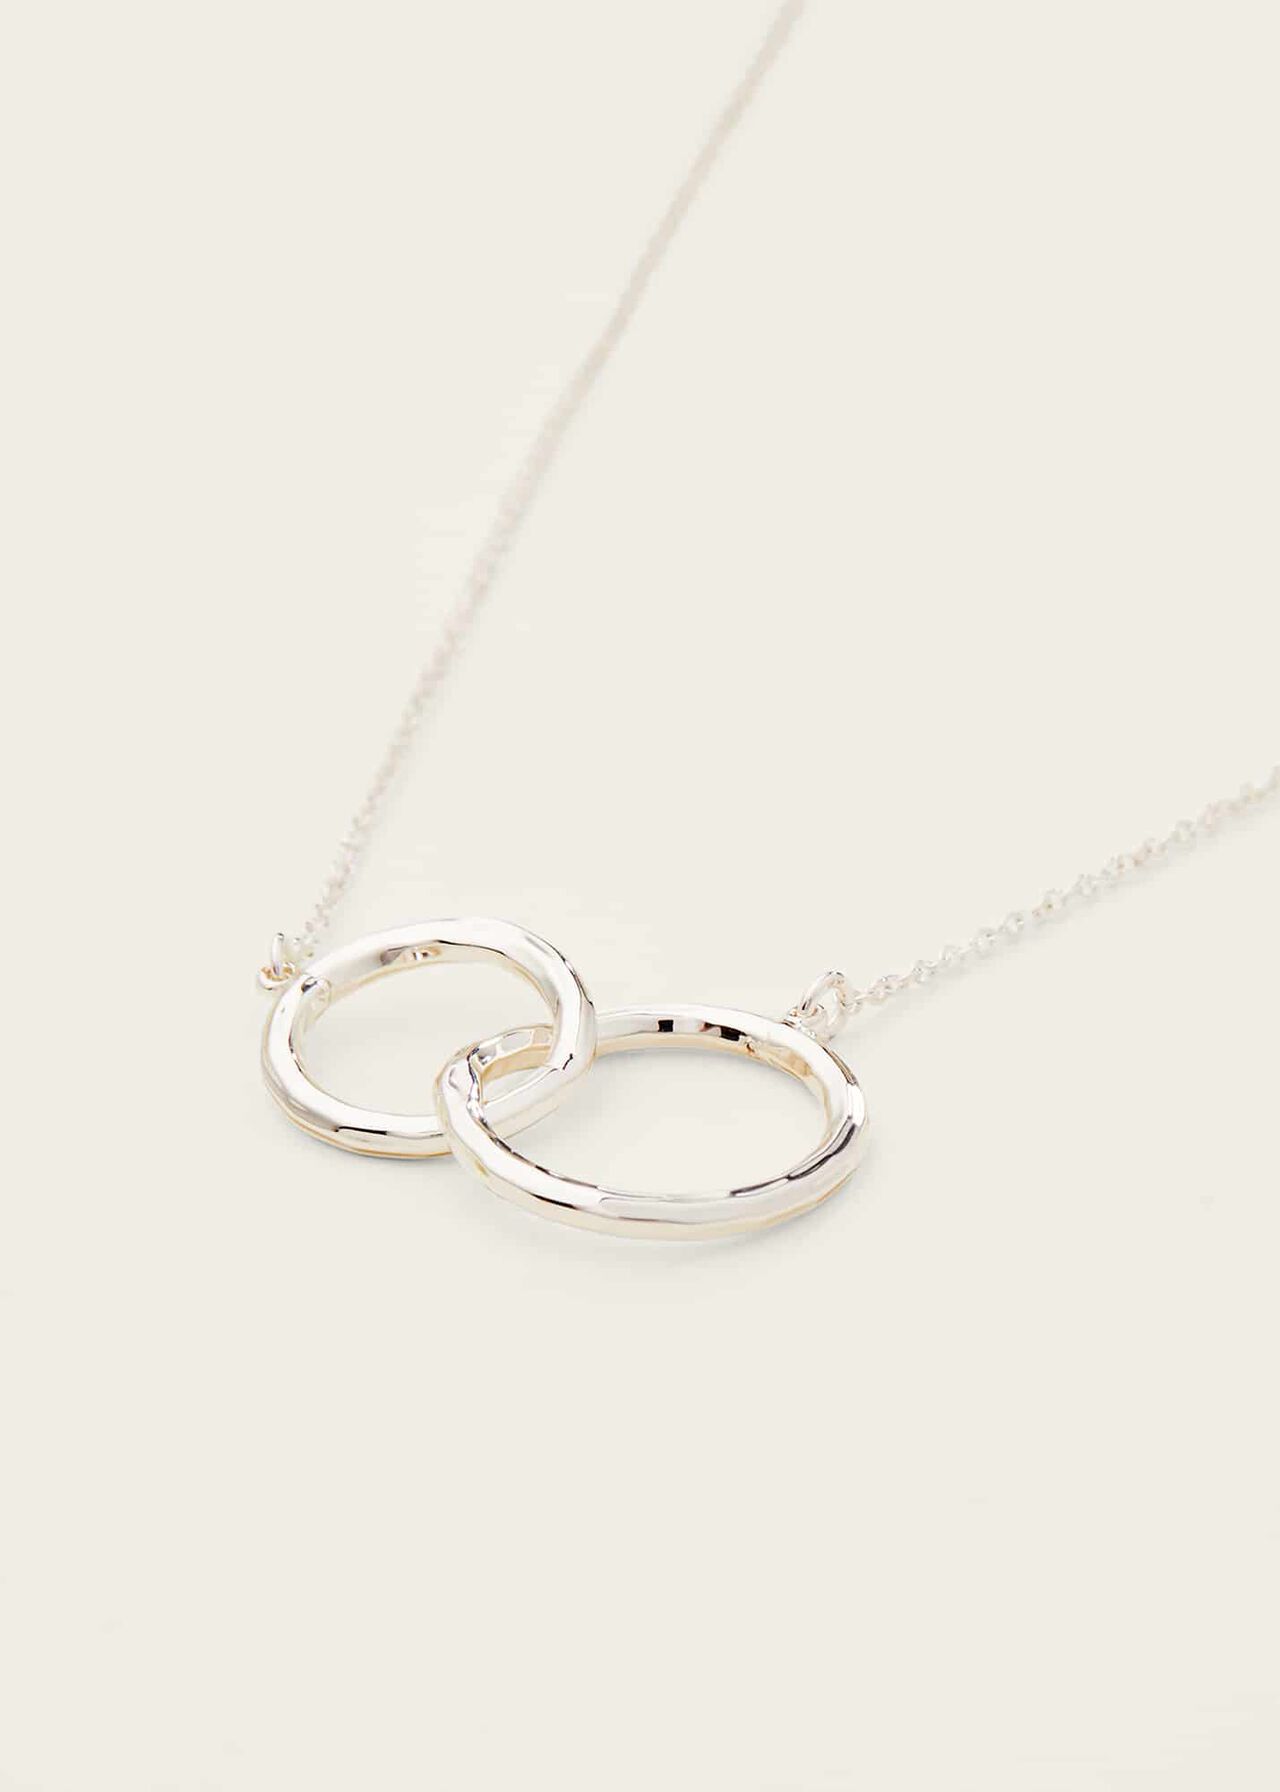 Silver Chain Ring Necklace